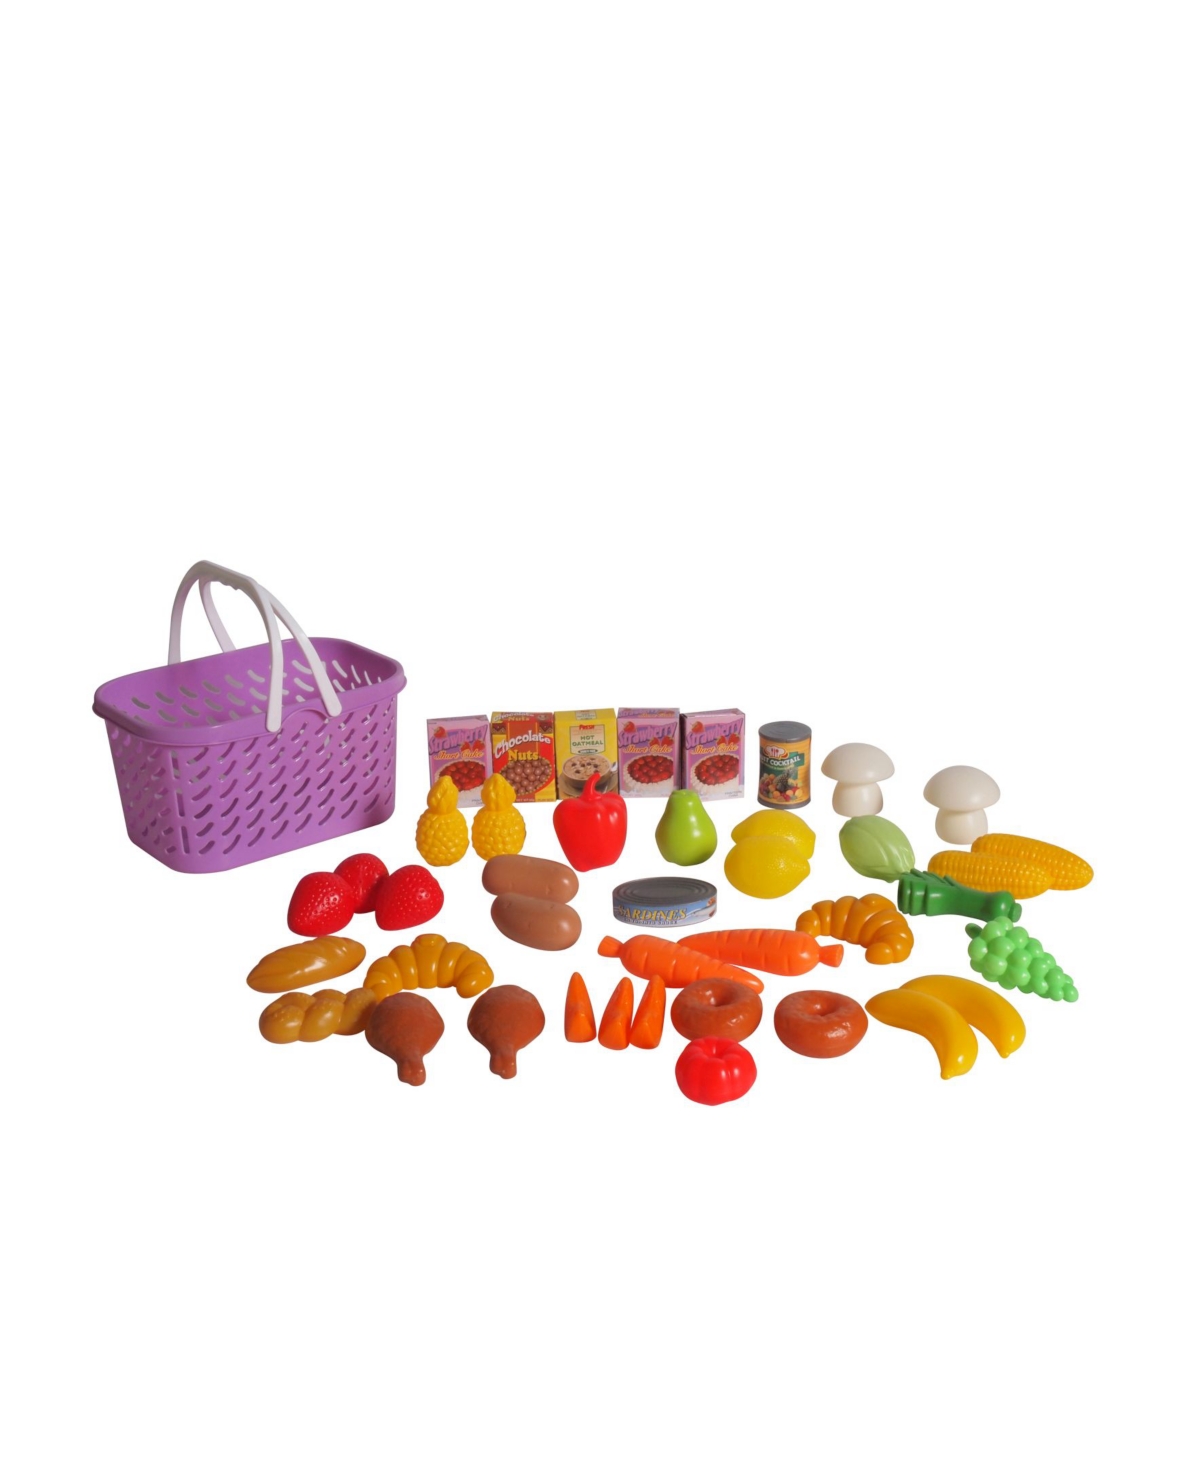 Dream Collection Pretend Play Food Basket In Multi